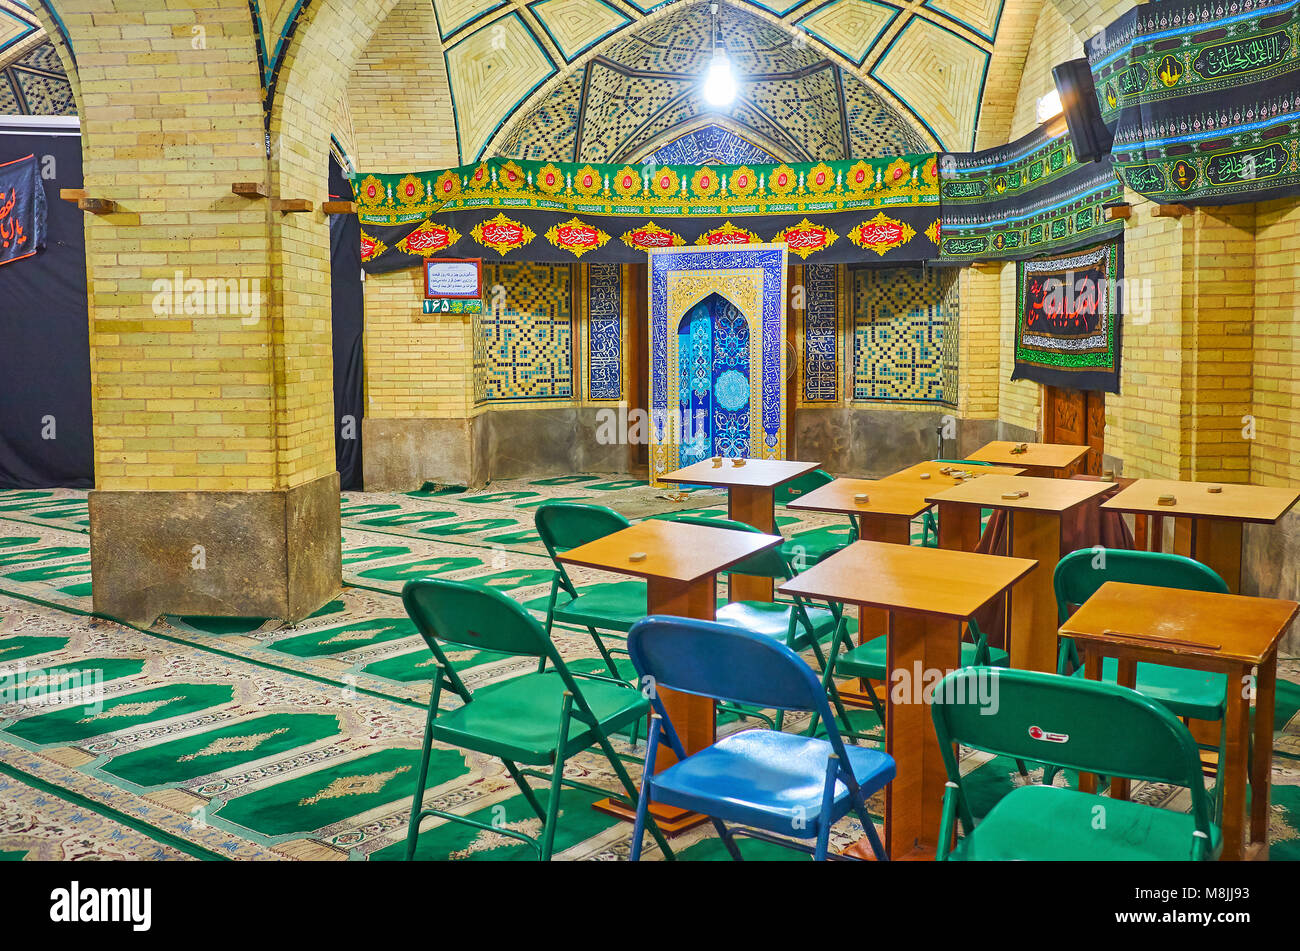 ISFAHAN, IRAN - OCTOBER 20, 2017: The classroom in Chaharbagh madraseh with desks and chairs in building of the mosque, on October 20 in Isfahan. Stock Photo